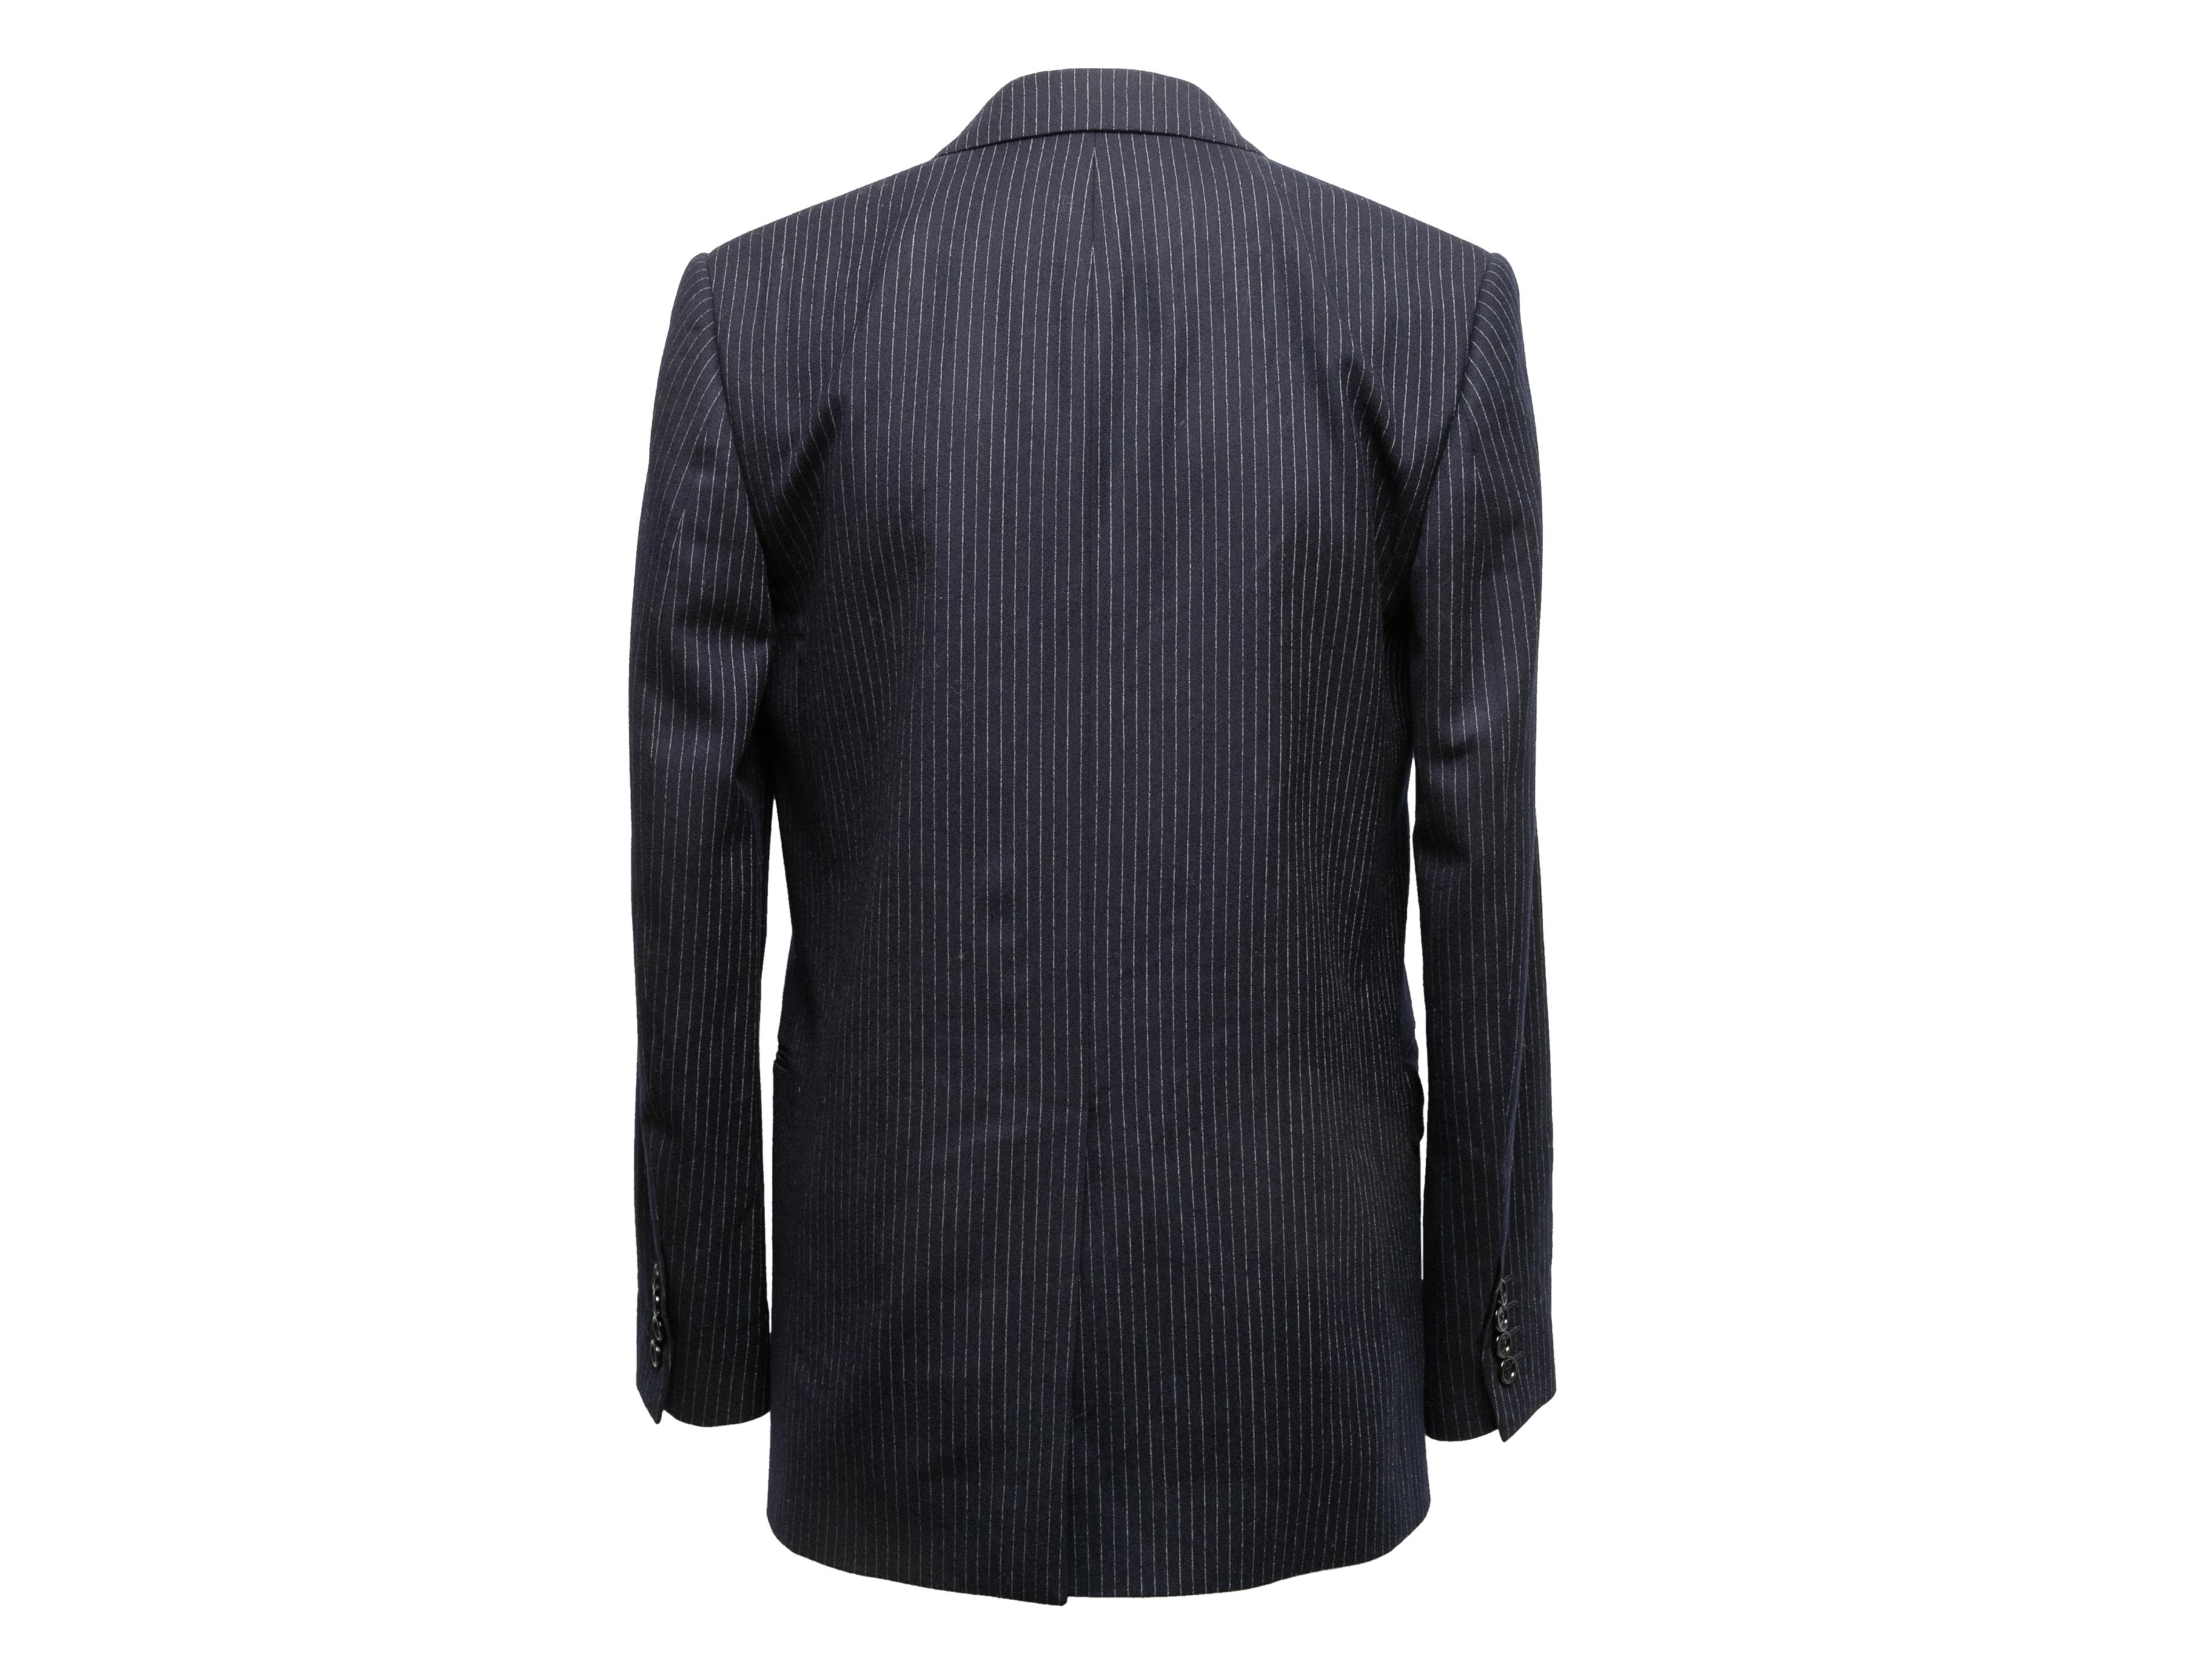 Black and white pinstriped double-breasted blazer by Celine. From the Hedi Slimane Era. Peaked lapel. Three pockets. Button closures at front. 32